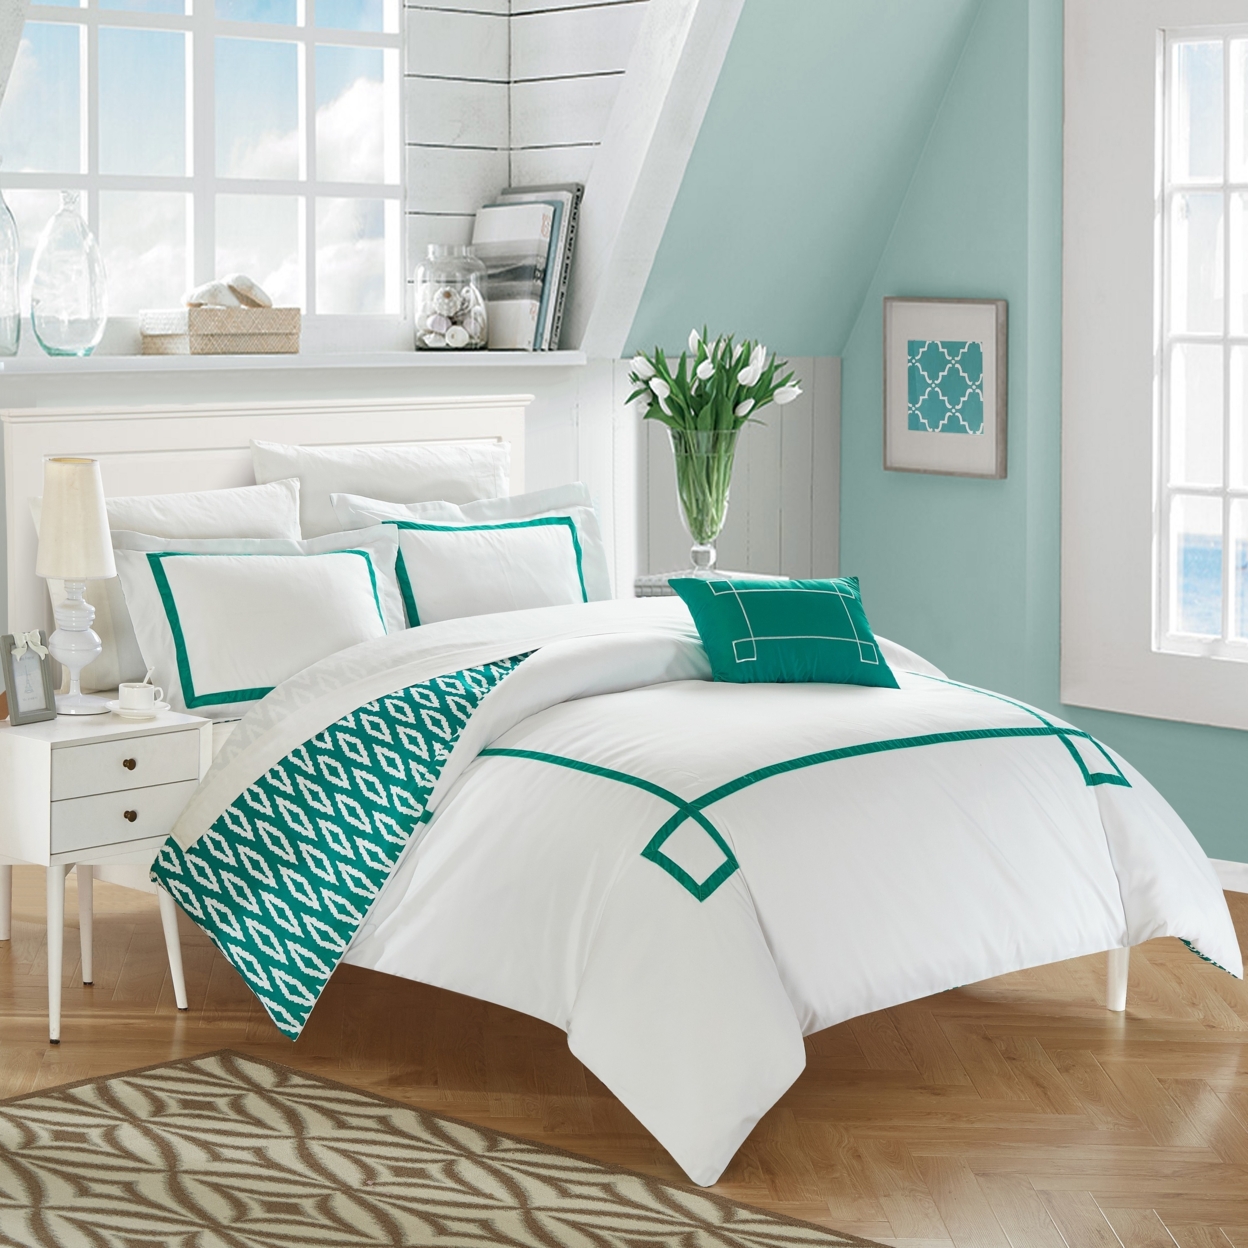 3/4 Piece Berwin Embroidered REVERSIBLE Duvet Cover Set With Shams And Decorative Pillows Included - Aqua, King